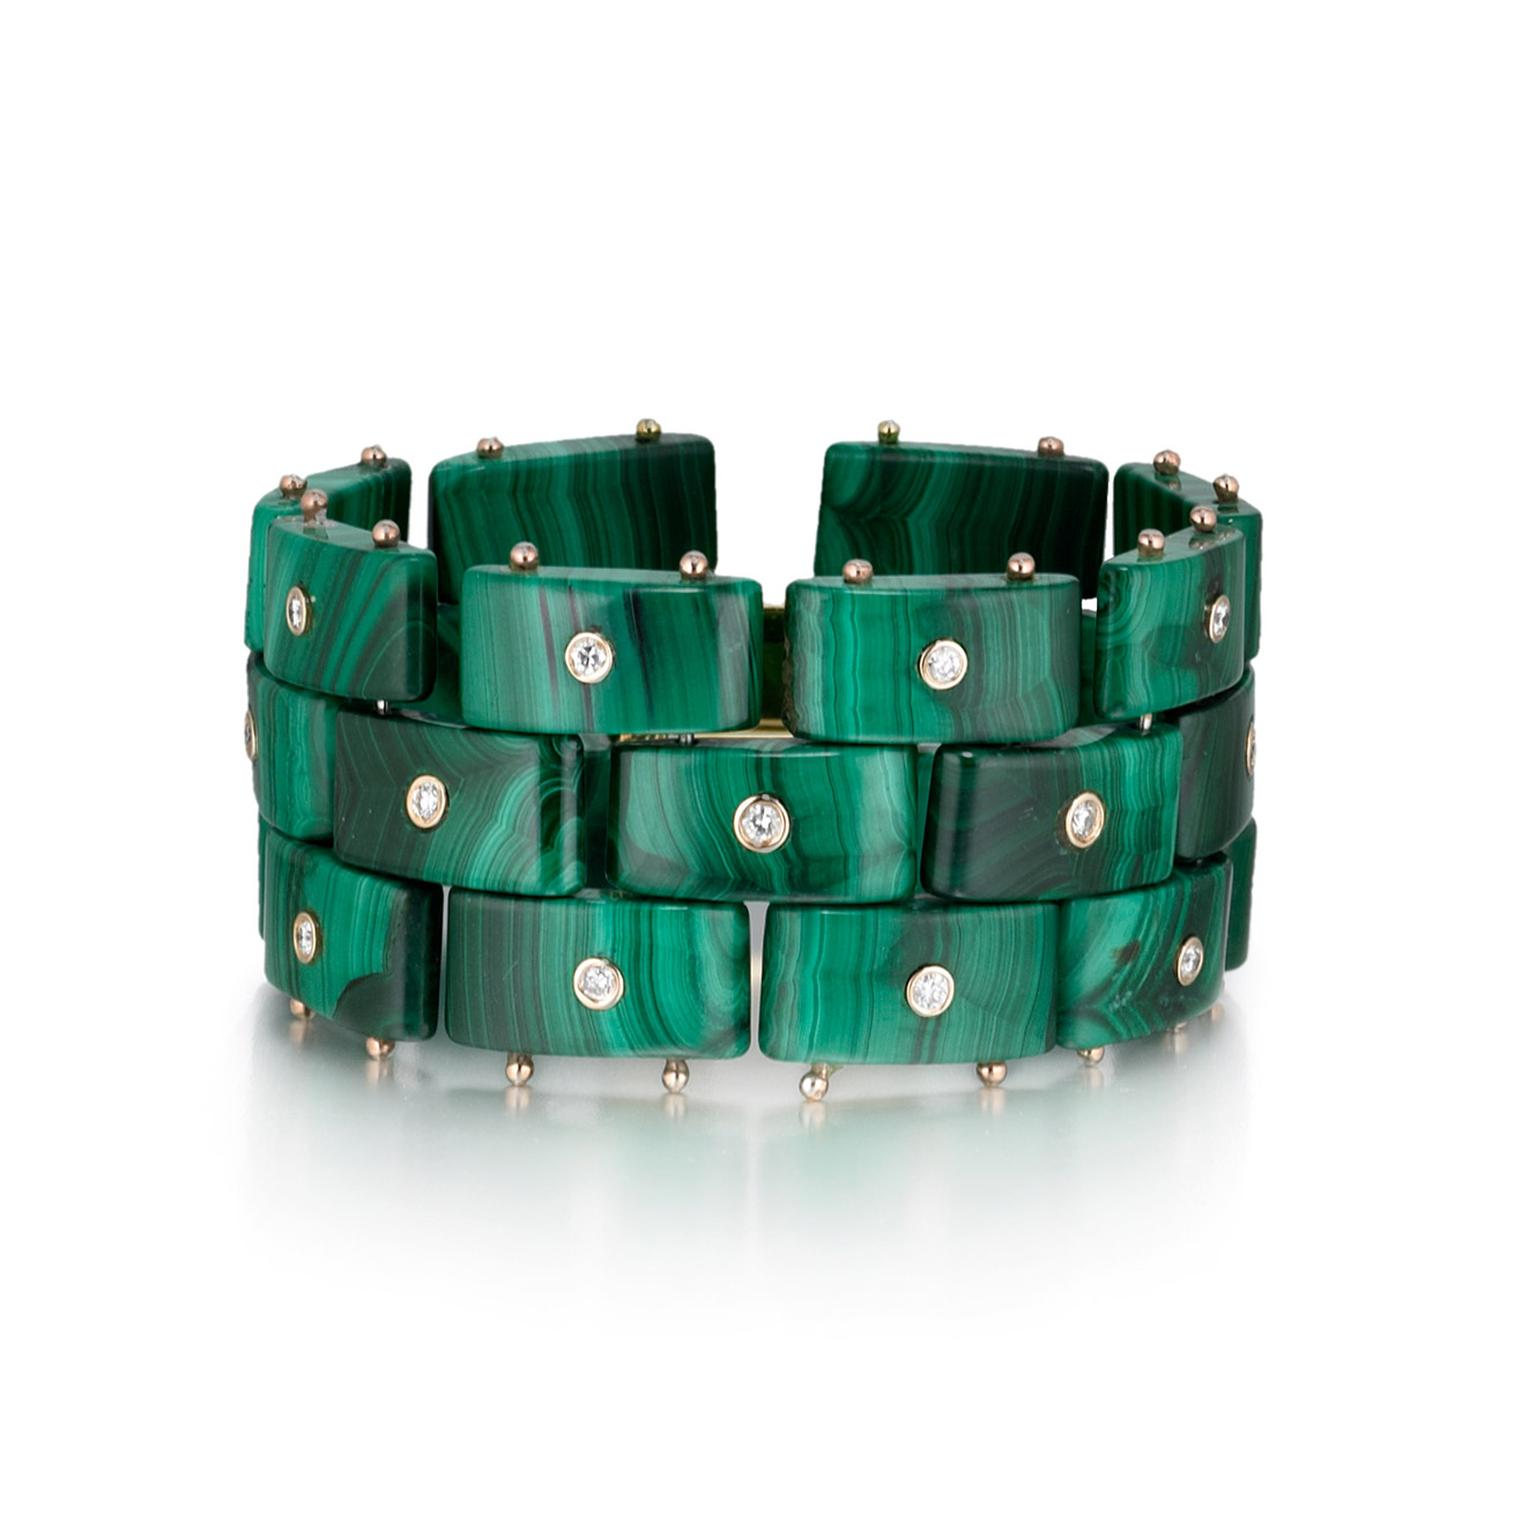 Malachite jewelry: re-enter the Seventies in style